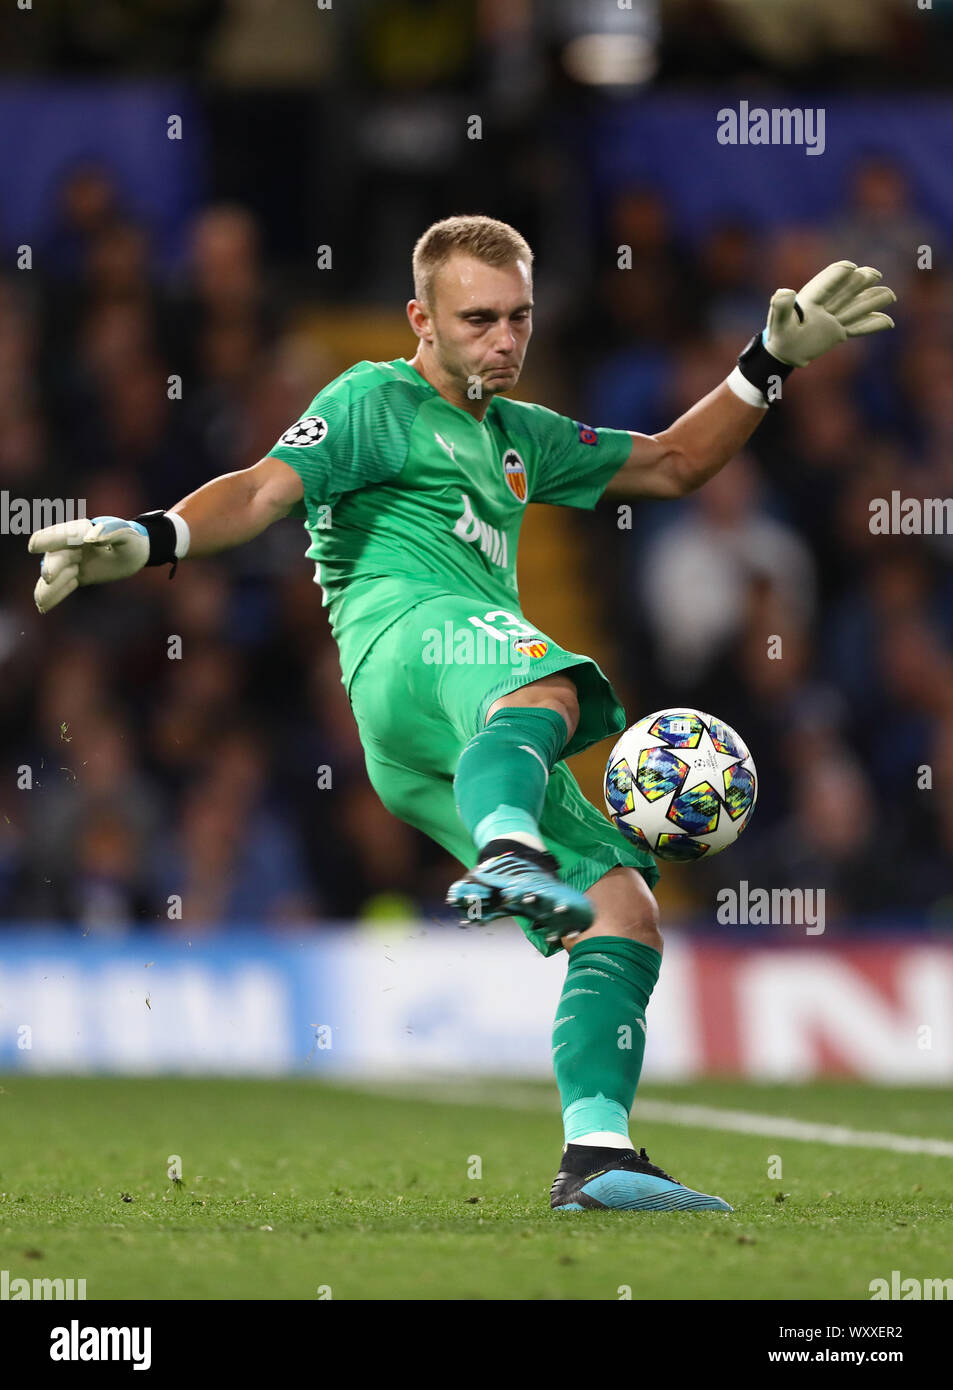 London, UK. 17th Sep, 2019. Jasper Cillessen of Valencia - Chelsea v Valencia, UEFA Champions League - Group H, Stamford Bridge, London, UK - 17th September 2019  Editorial Use Only Credit: MatchDay Images Limited/Alamy Live News Stock Photo